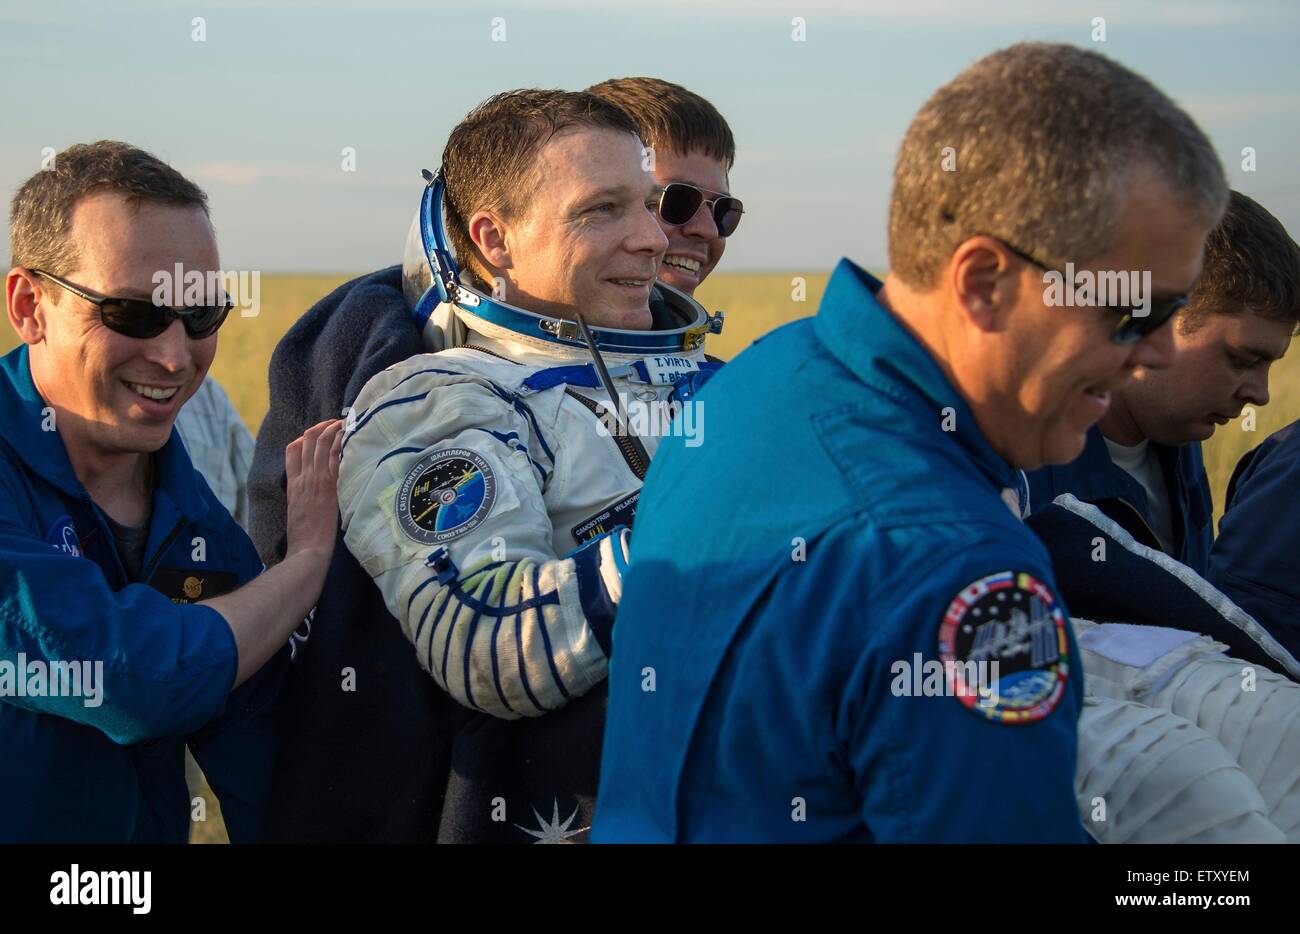 International Space Station Expedition 43 crew member American Terry Virts of NASA is carried to the medical tent moments after landing in a remote area in the Soyuz TMA-15M spacecraft June 11, 2015 near Zhezkazgan, Kazakhstan. The crew is returning after more than six months onboard the International Space Station. Stock Photo